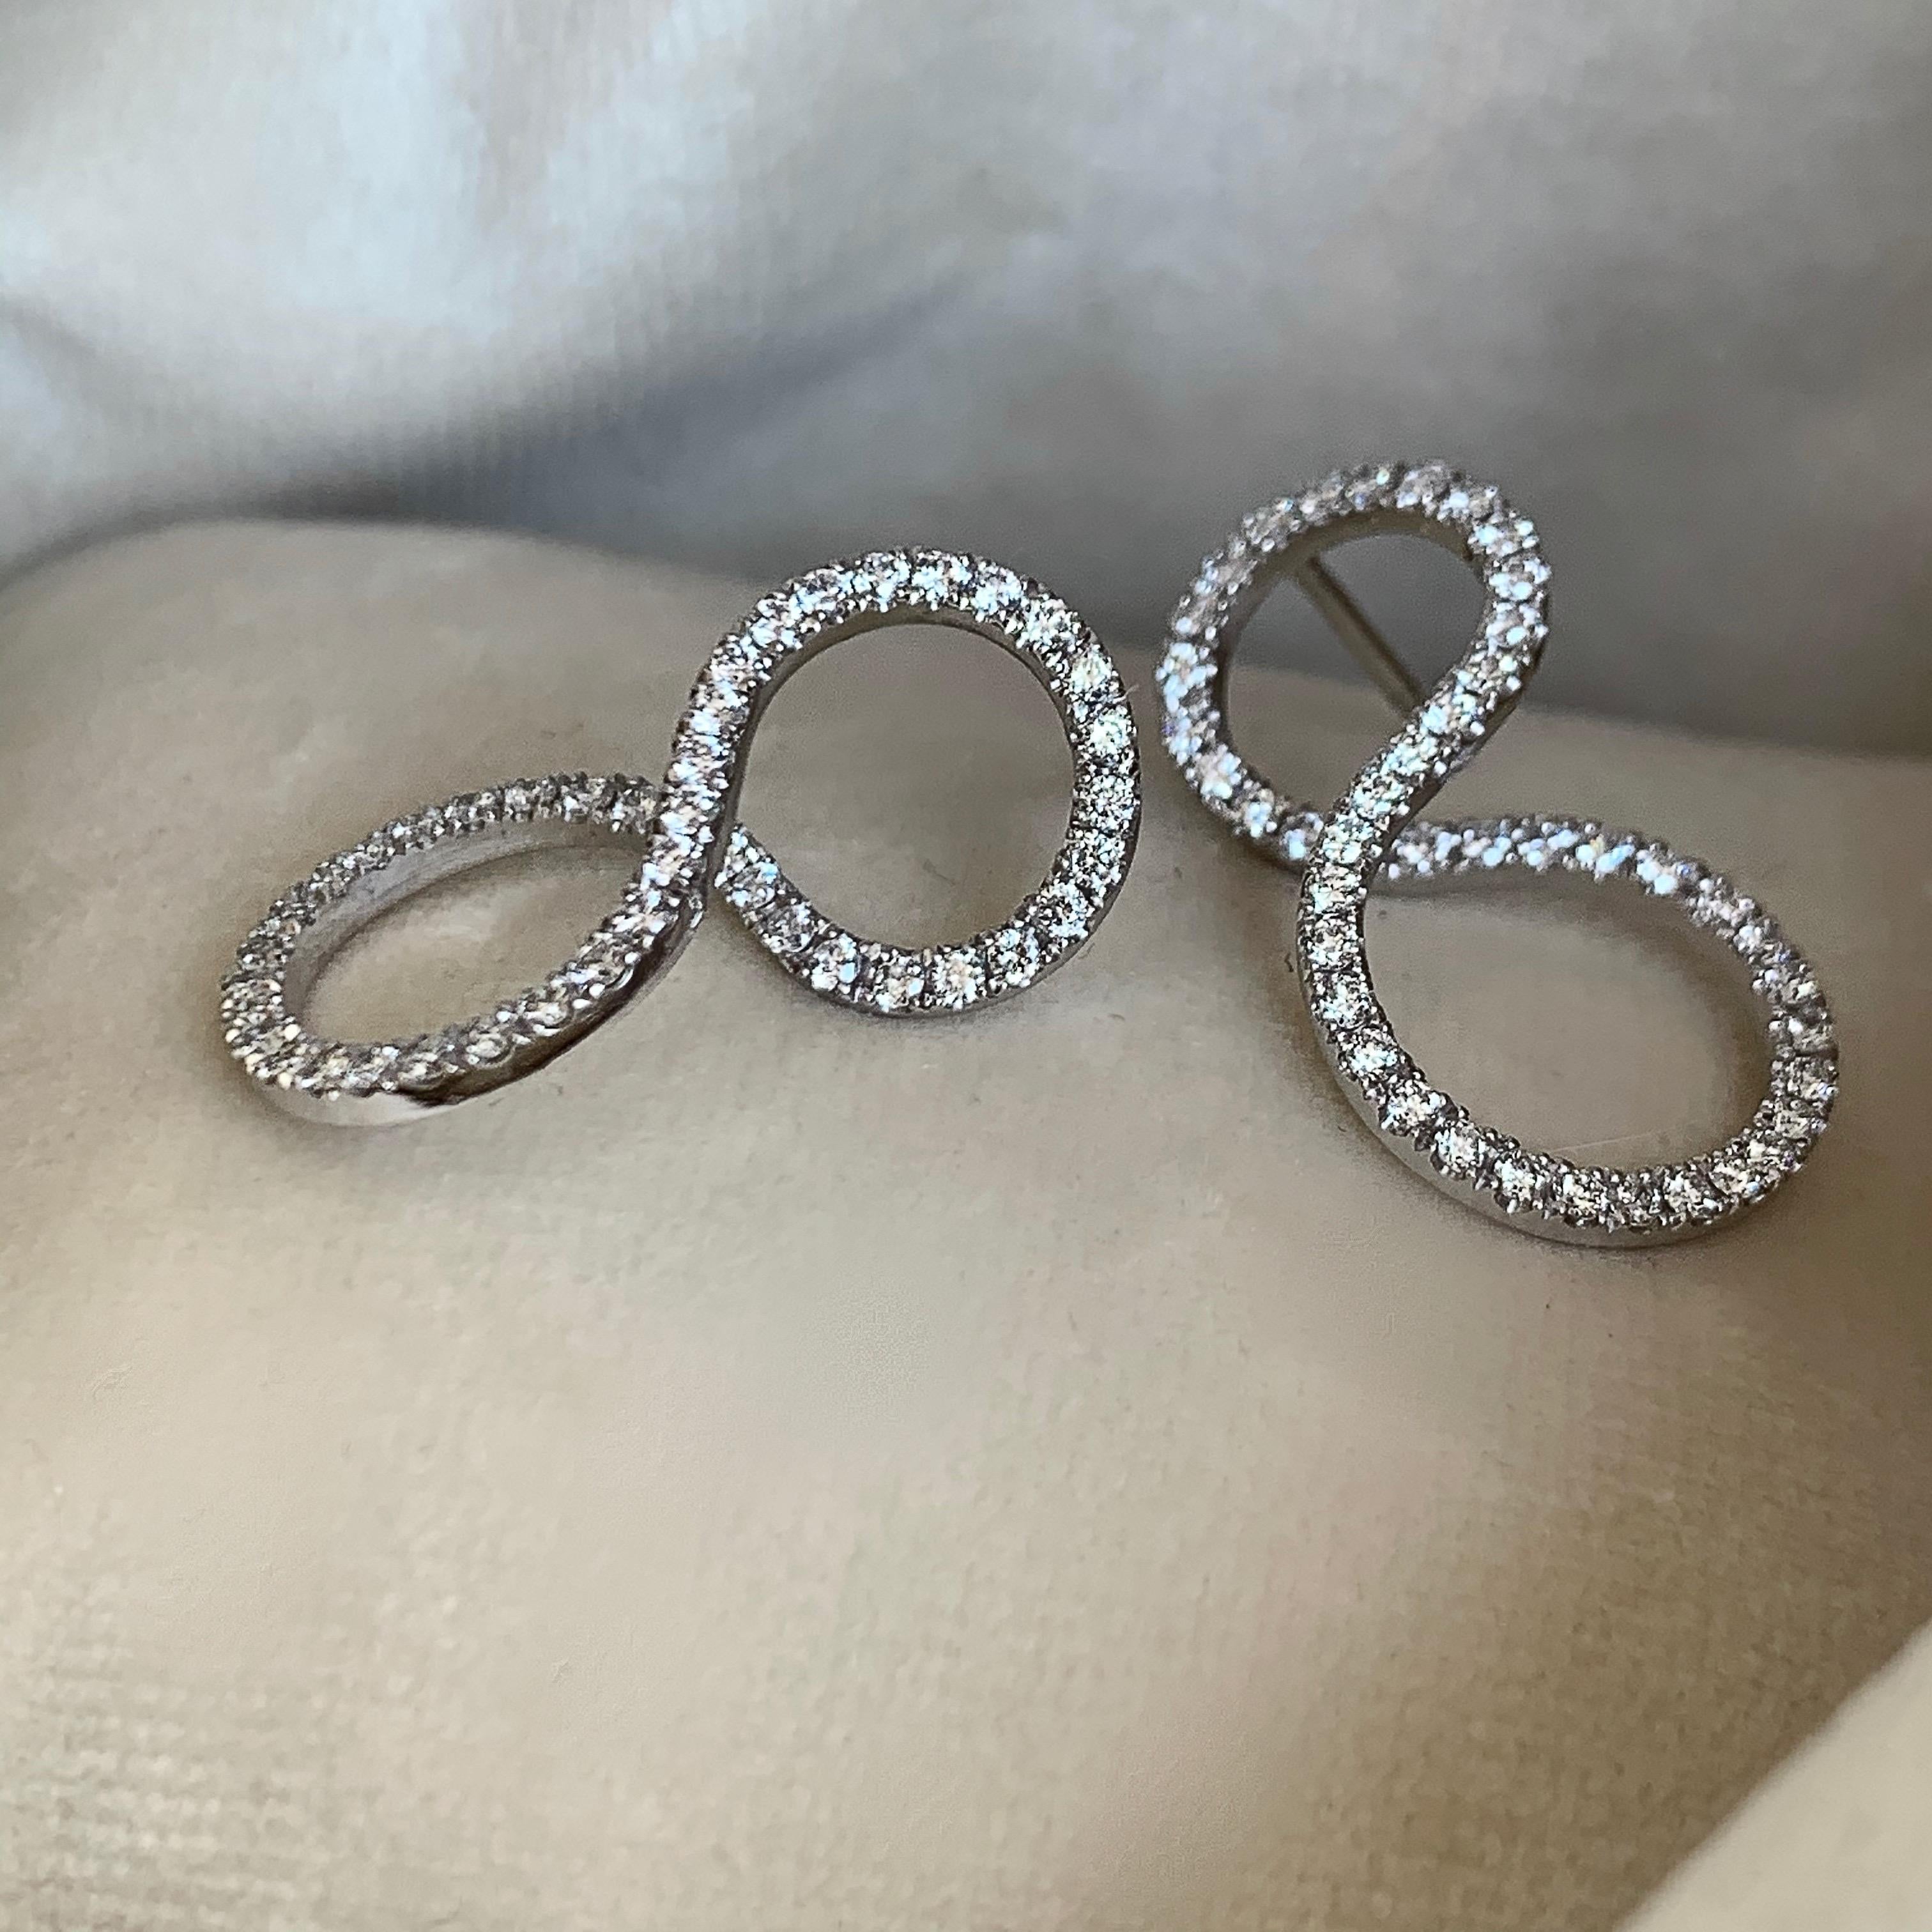 Earrings handmade in Belgium, in 18K white gold 4,6 g. Pave set with DGVS diamonds 0,90ct. The earrings can be worn in 2 ways, by changing the ear you get a different look. This exquisite product comes from Joke Quick, a jewellery designer and